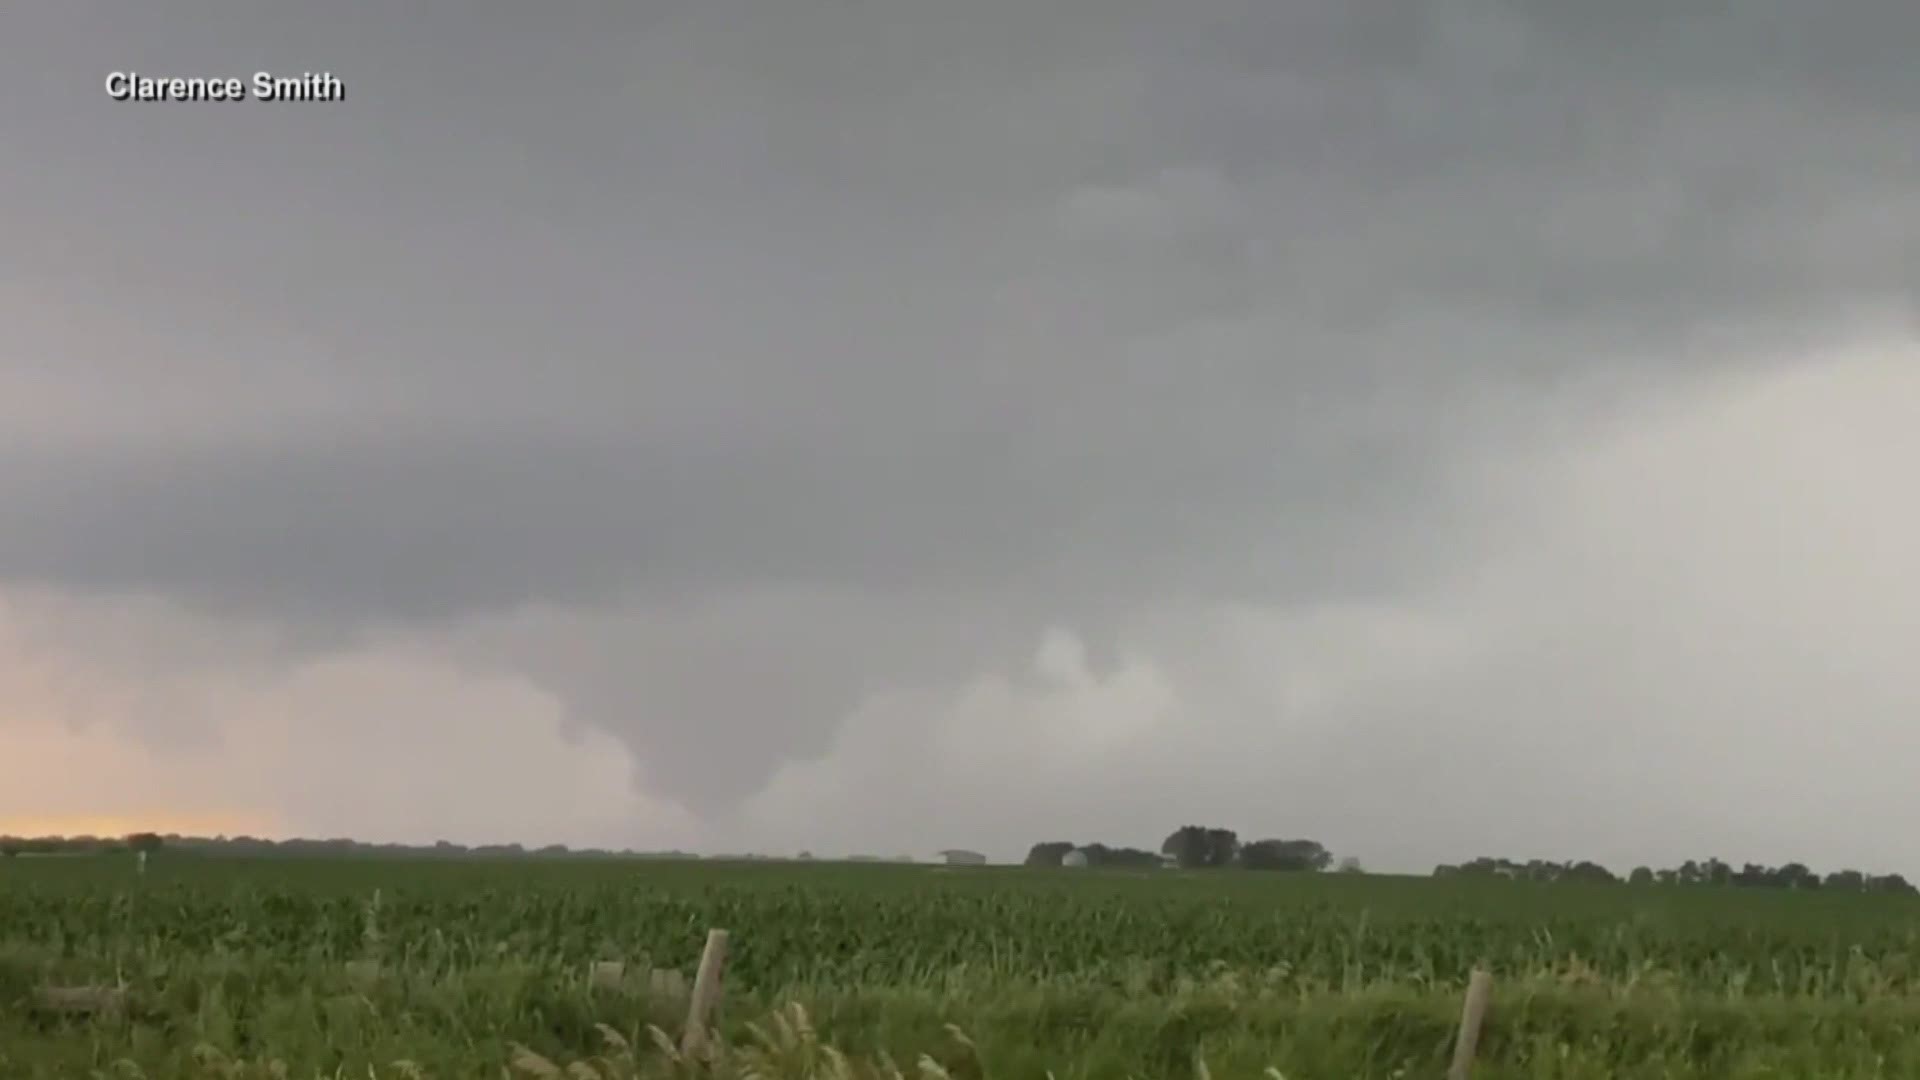 A tornado briefly touched down in Pella around 6:43 p.m. Sunday, causing some damage just northwest of the city.